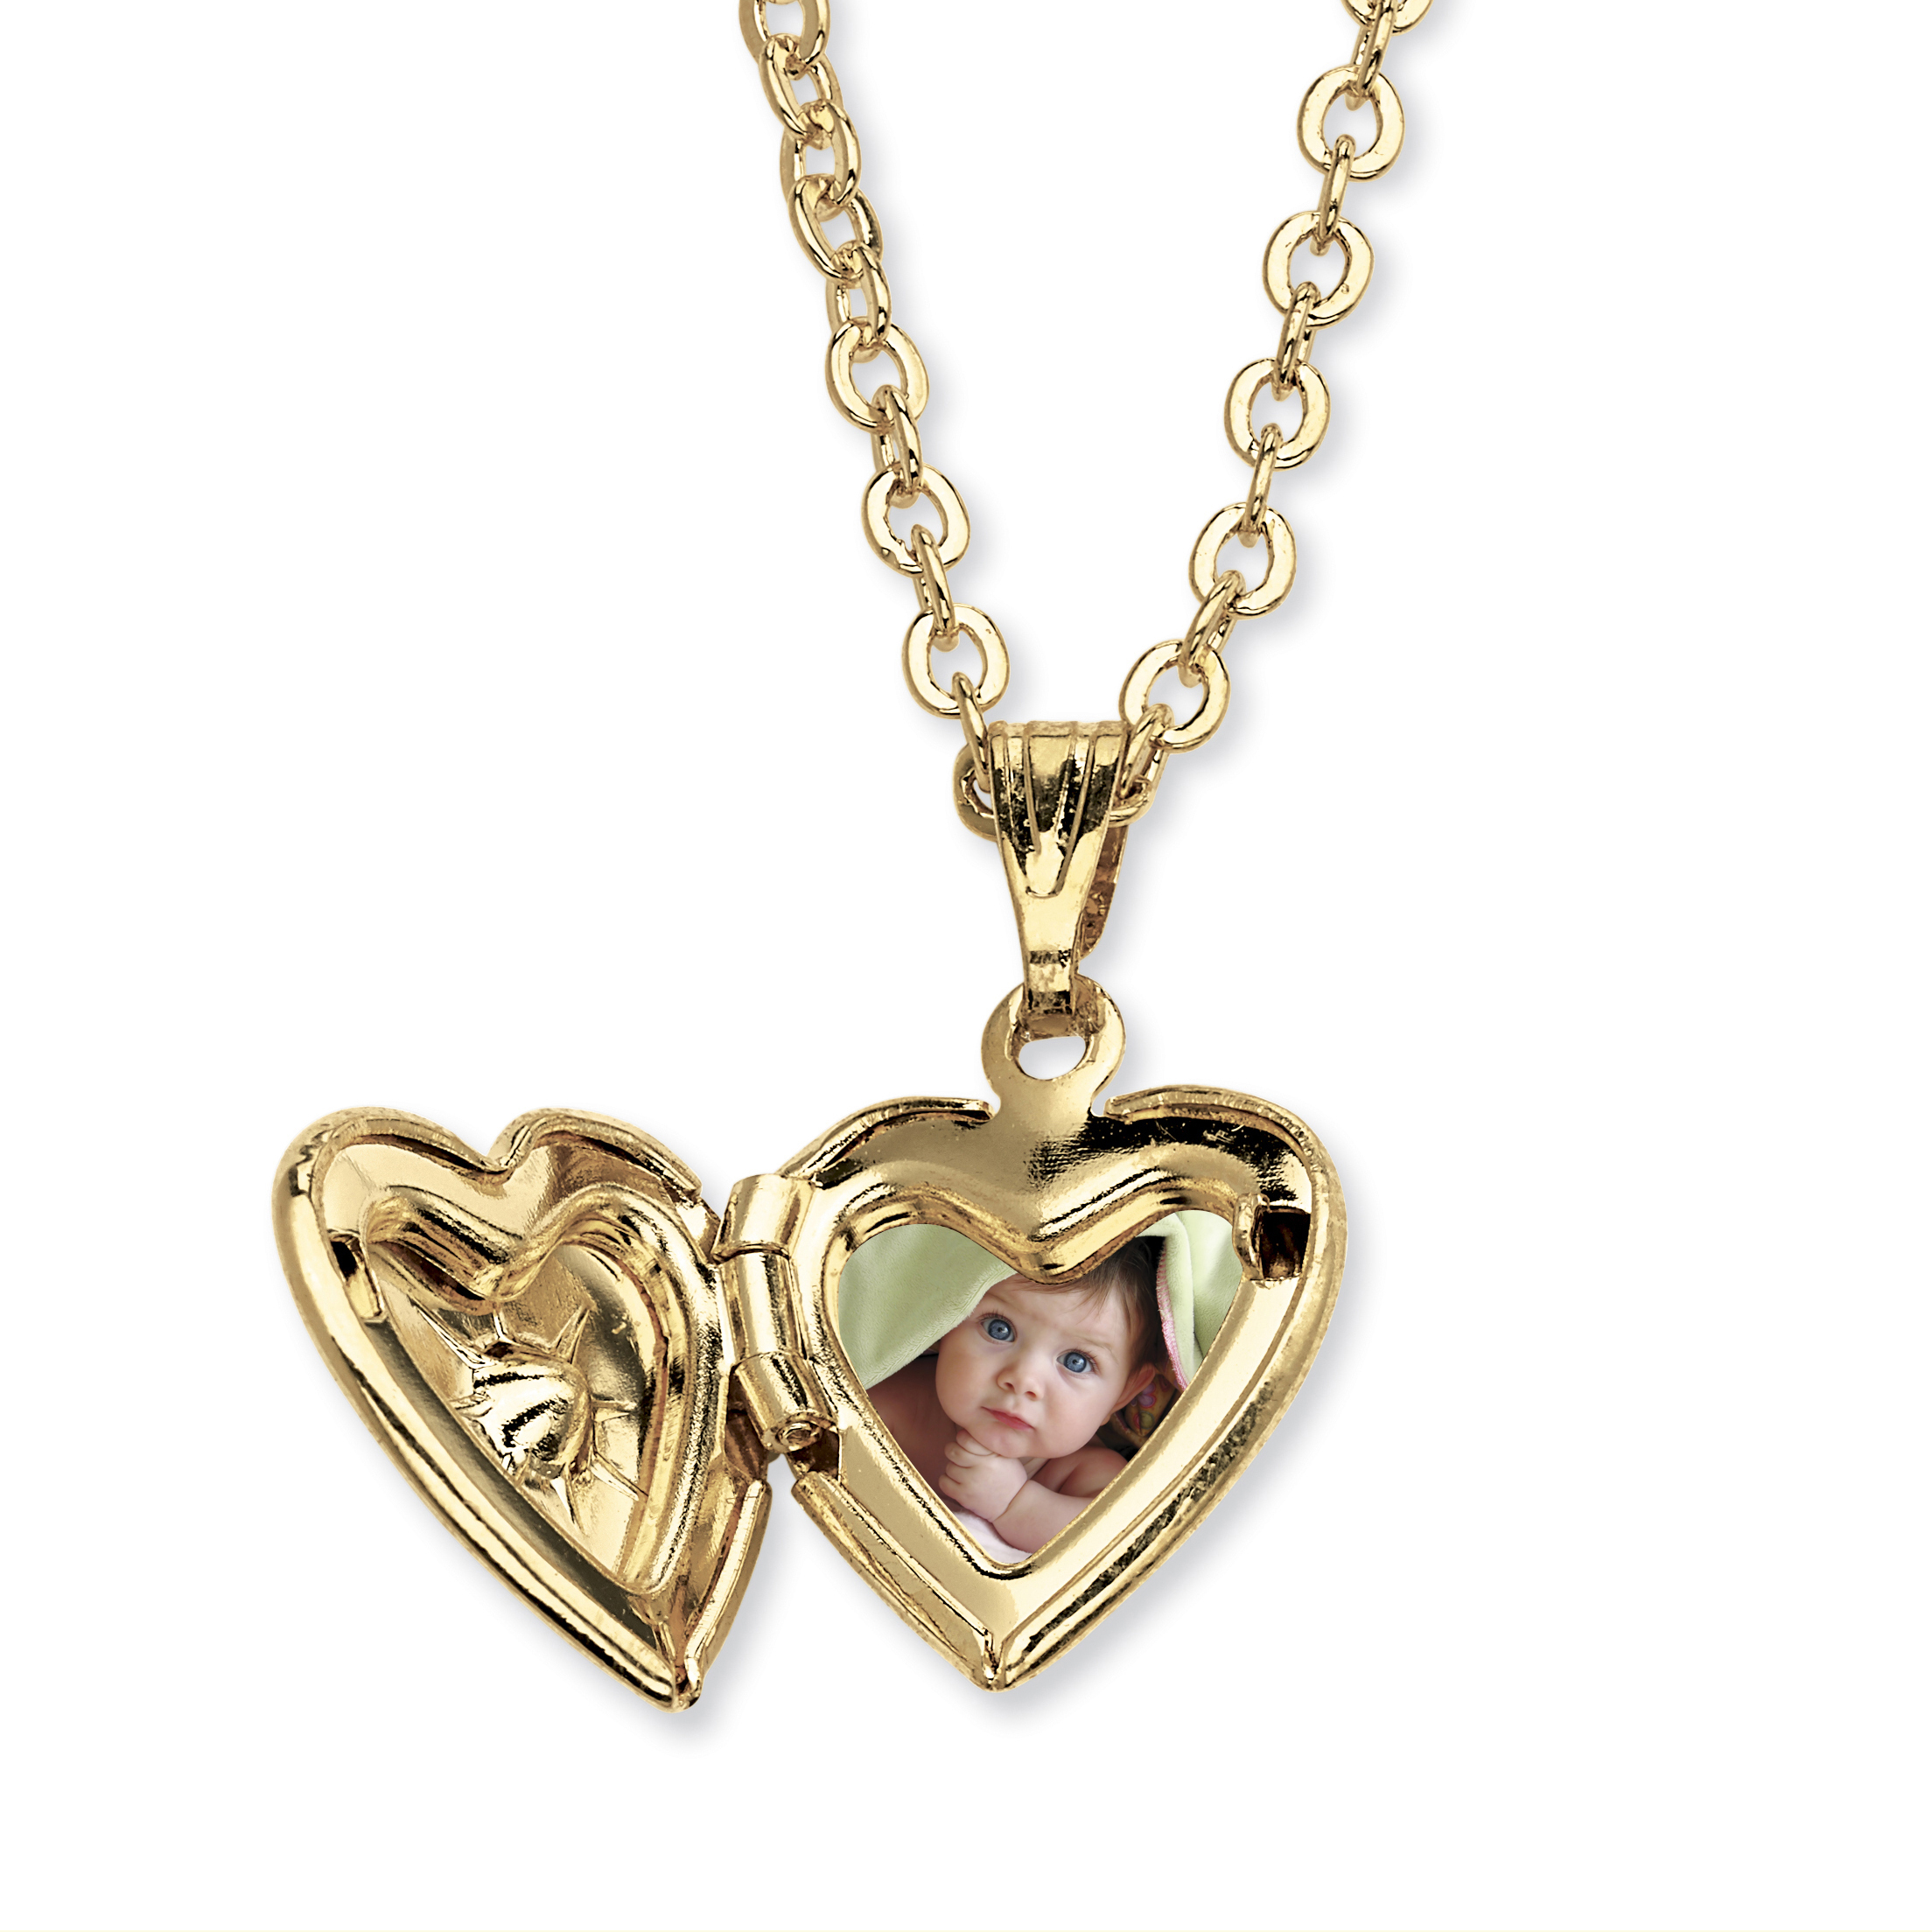 PalmBeach Jewelry Simulated Birthstone Heart Locket Necklace in Yellow Goldtone